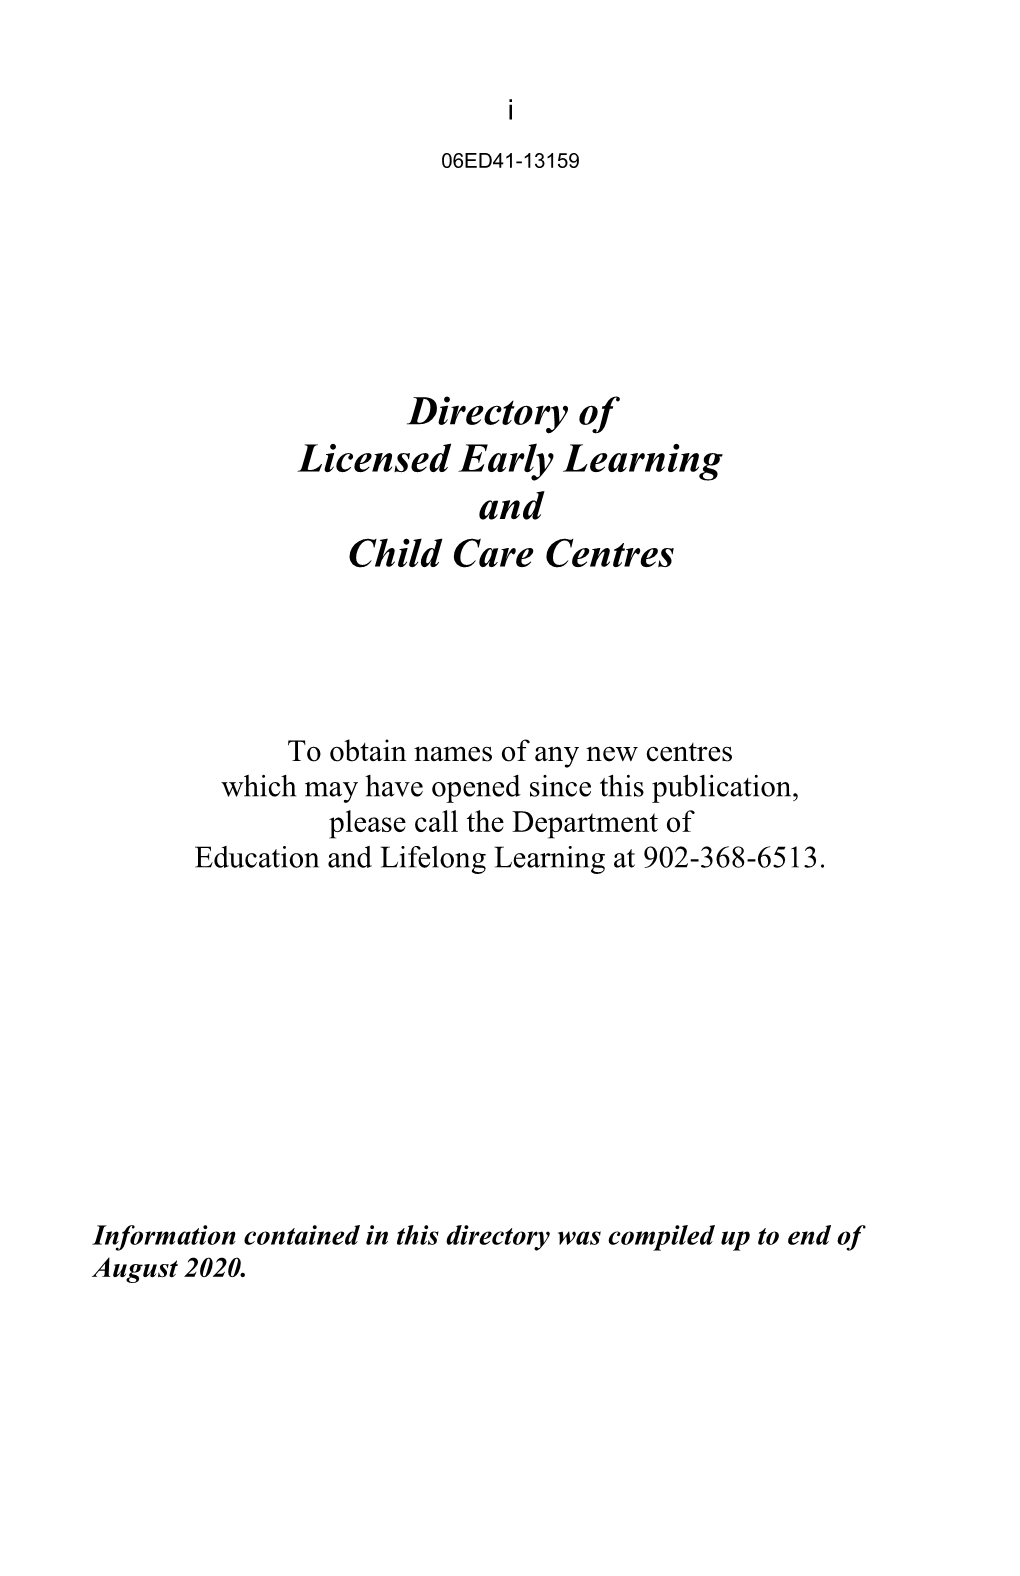 Directory of Licensed Early Learning and Child Care Centres